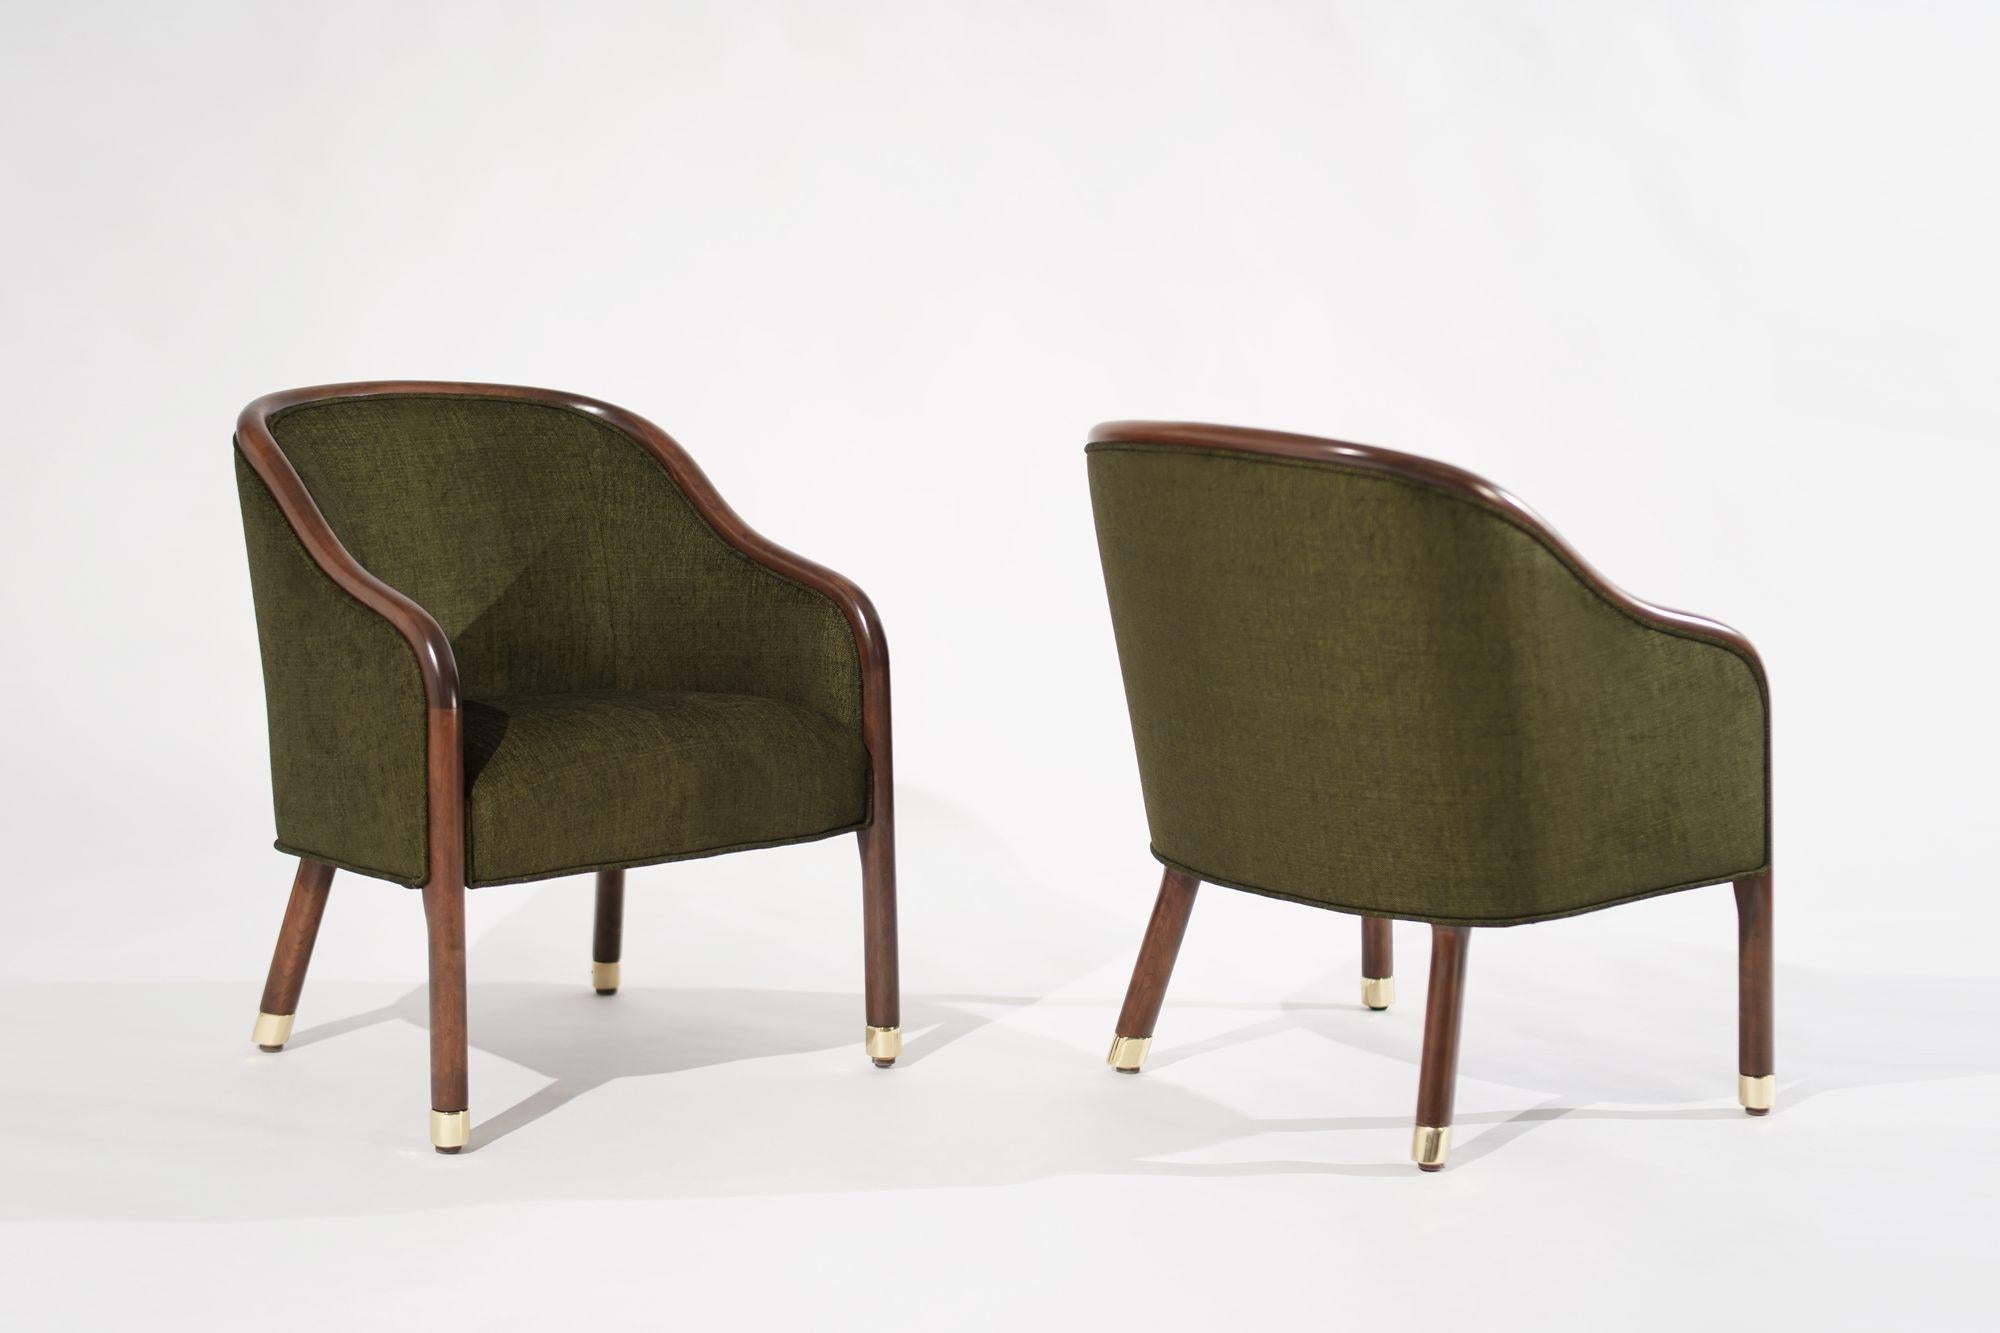 Vintage Ward Bennett Lounge Chairs, a true embodiment of 1970s design gracefully restored by Stamford Modern. These chairs exude the timeless charm of the era with their exposed walnut frames and brass feet, beautifully enhancing any space with a